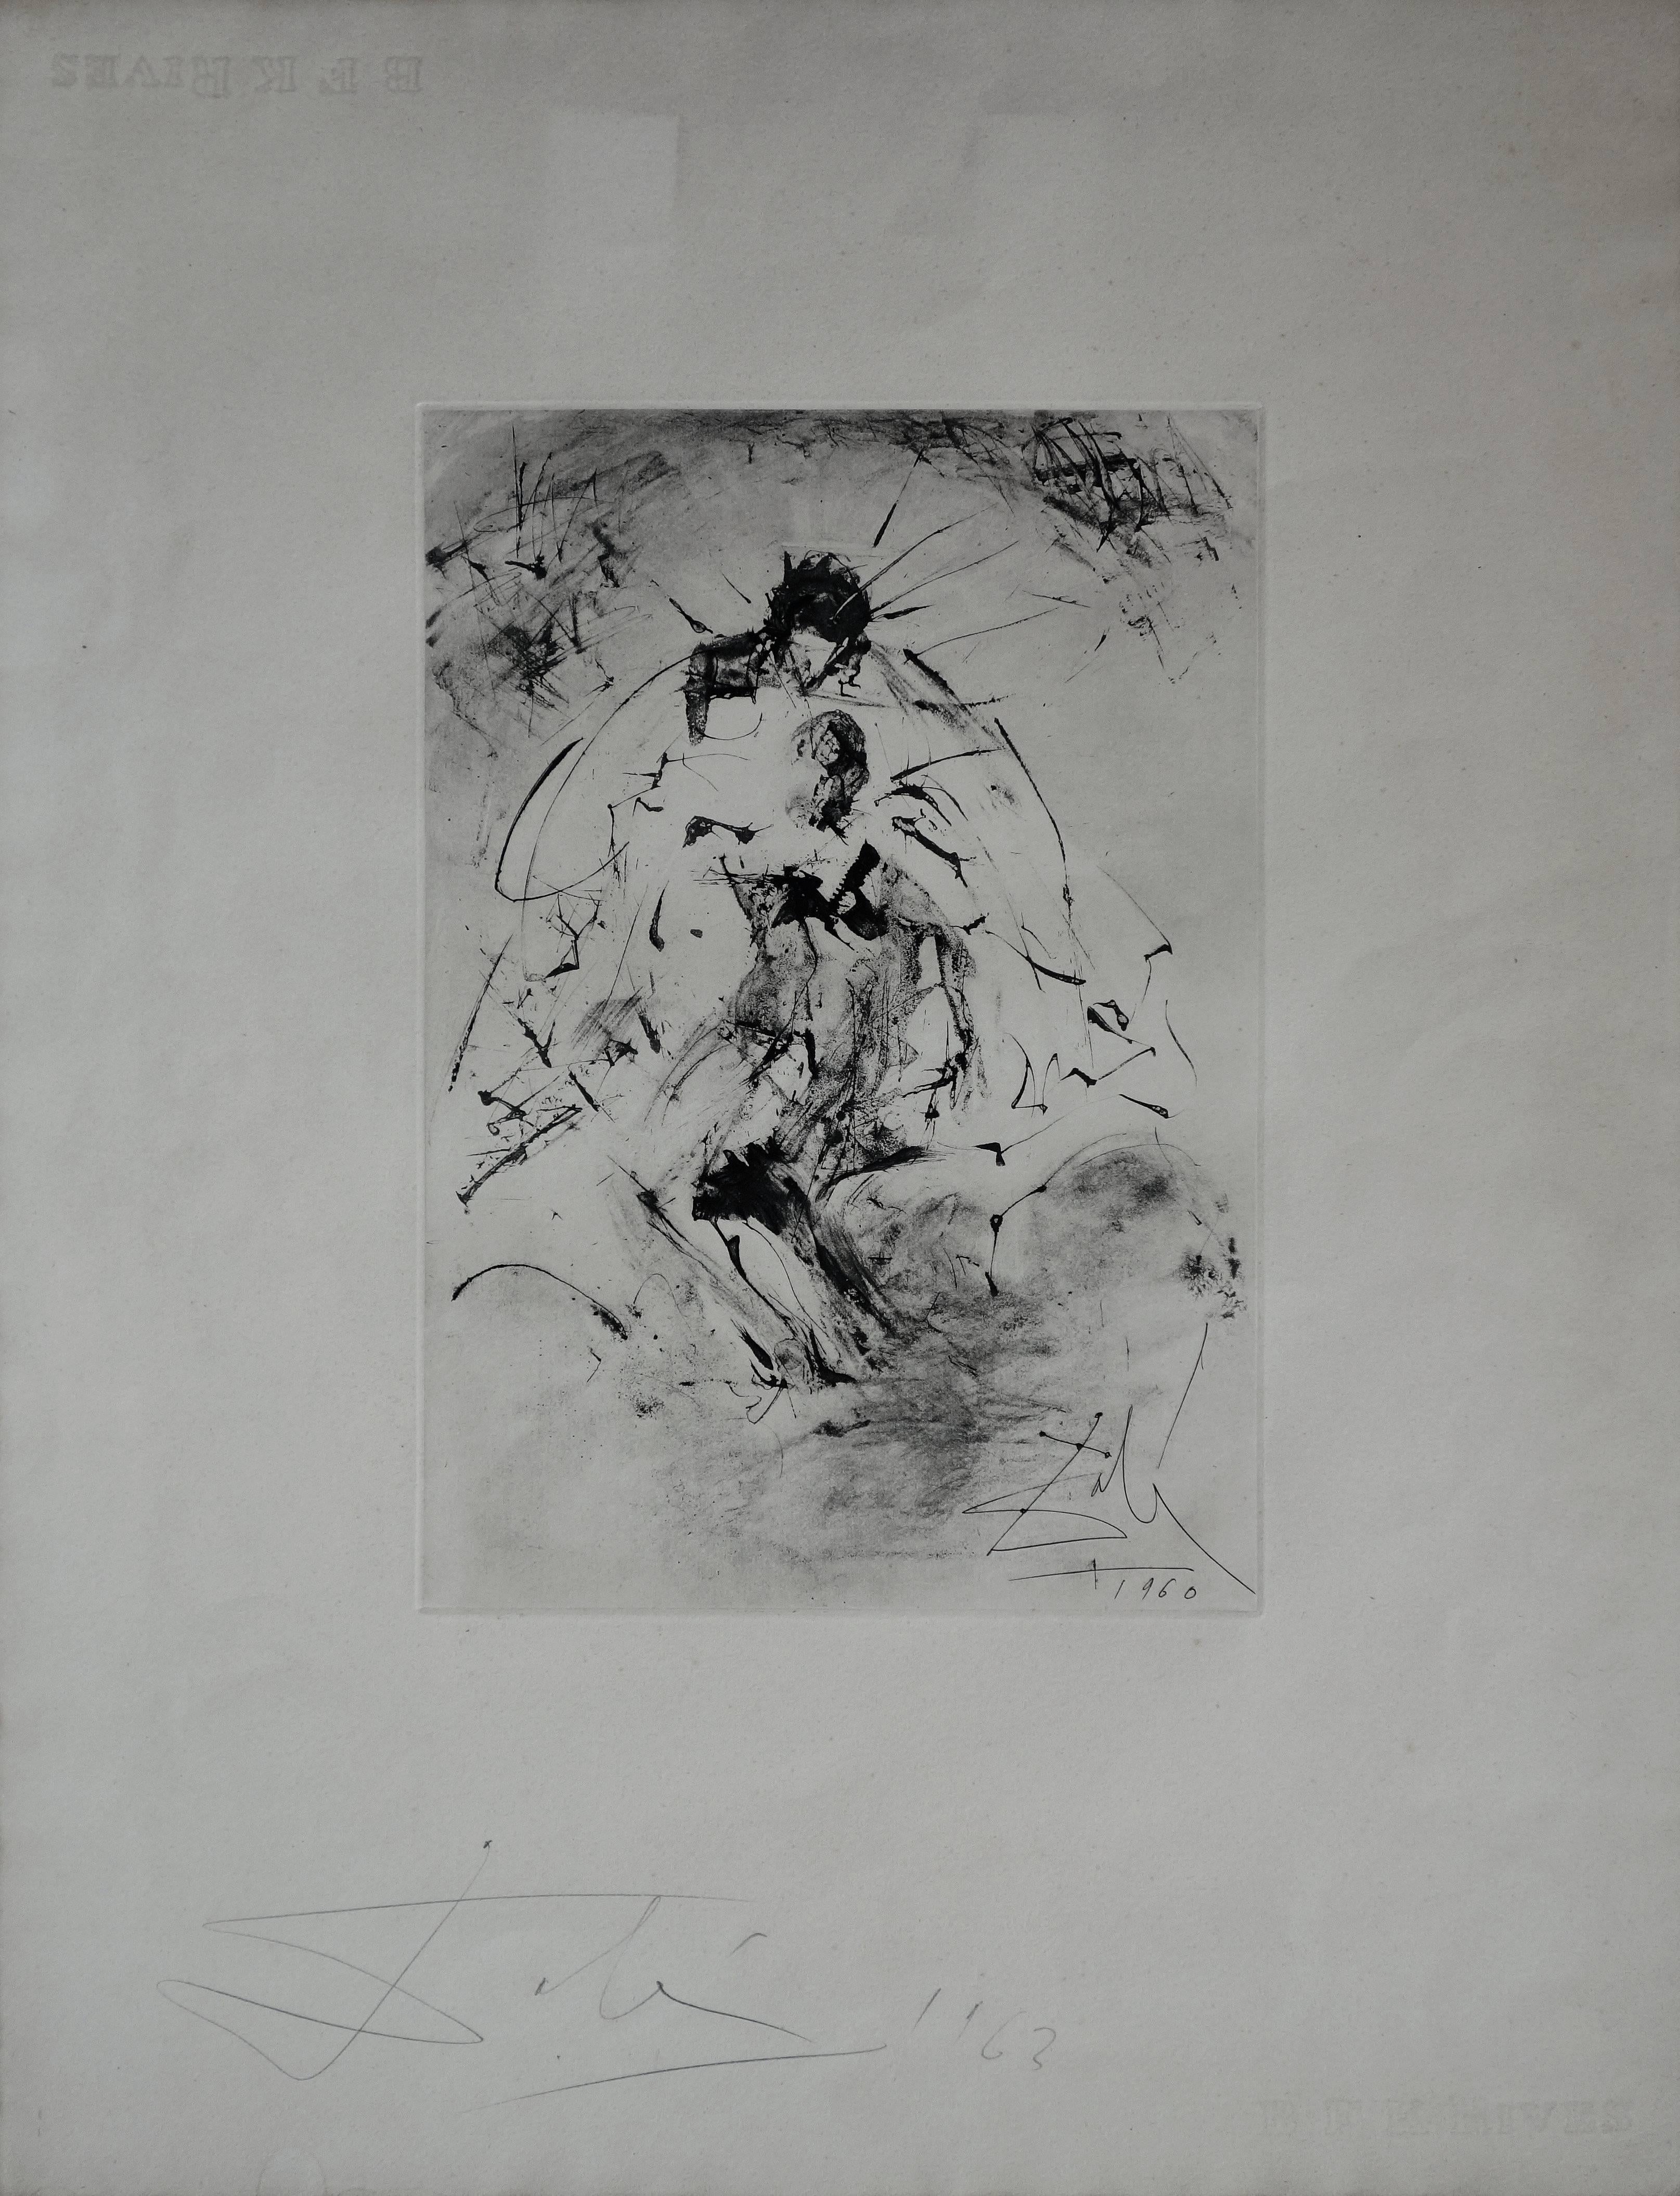 (after) Salvador Dali Figurative Print - Pieta : Isis Soutenant Osiris Mutile - Rare early etching - Boldly handsigned